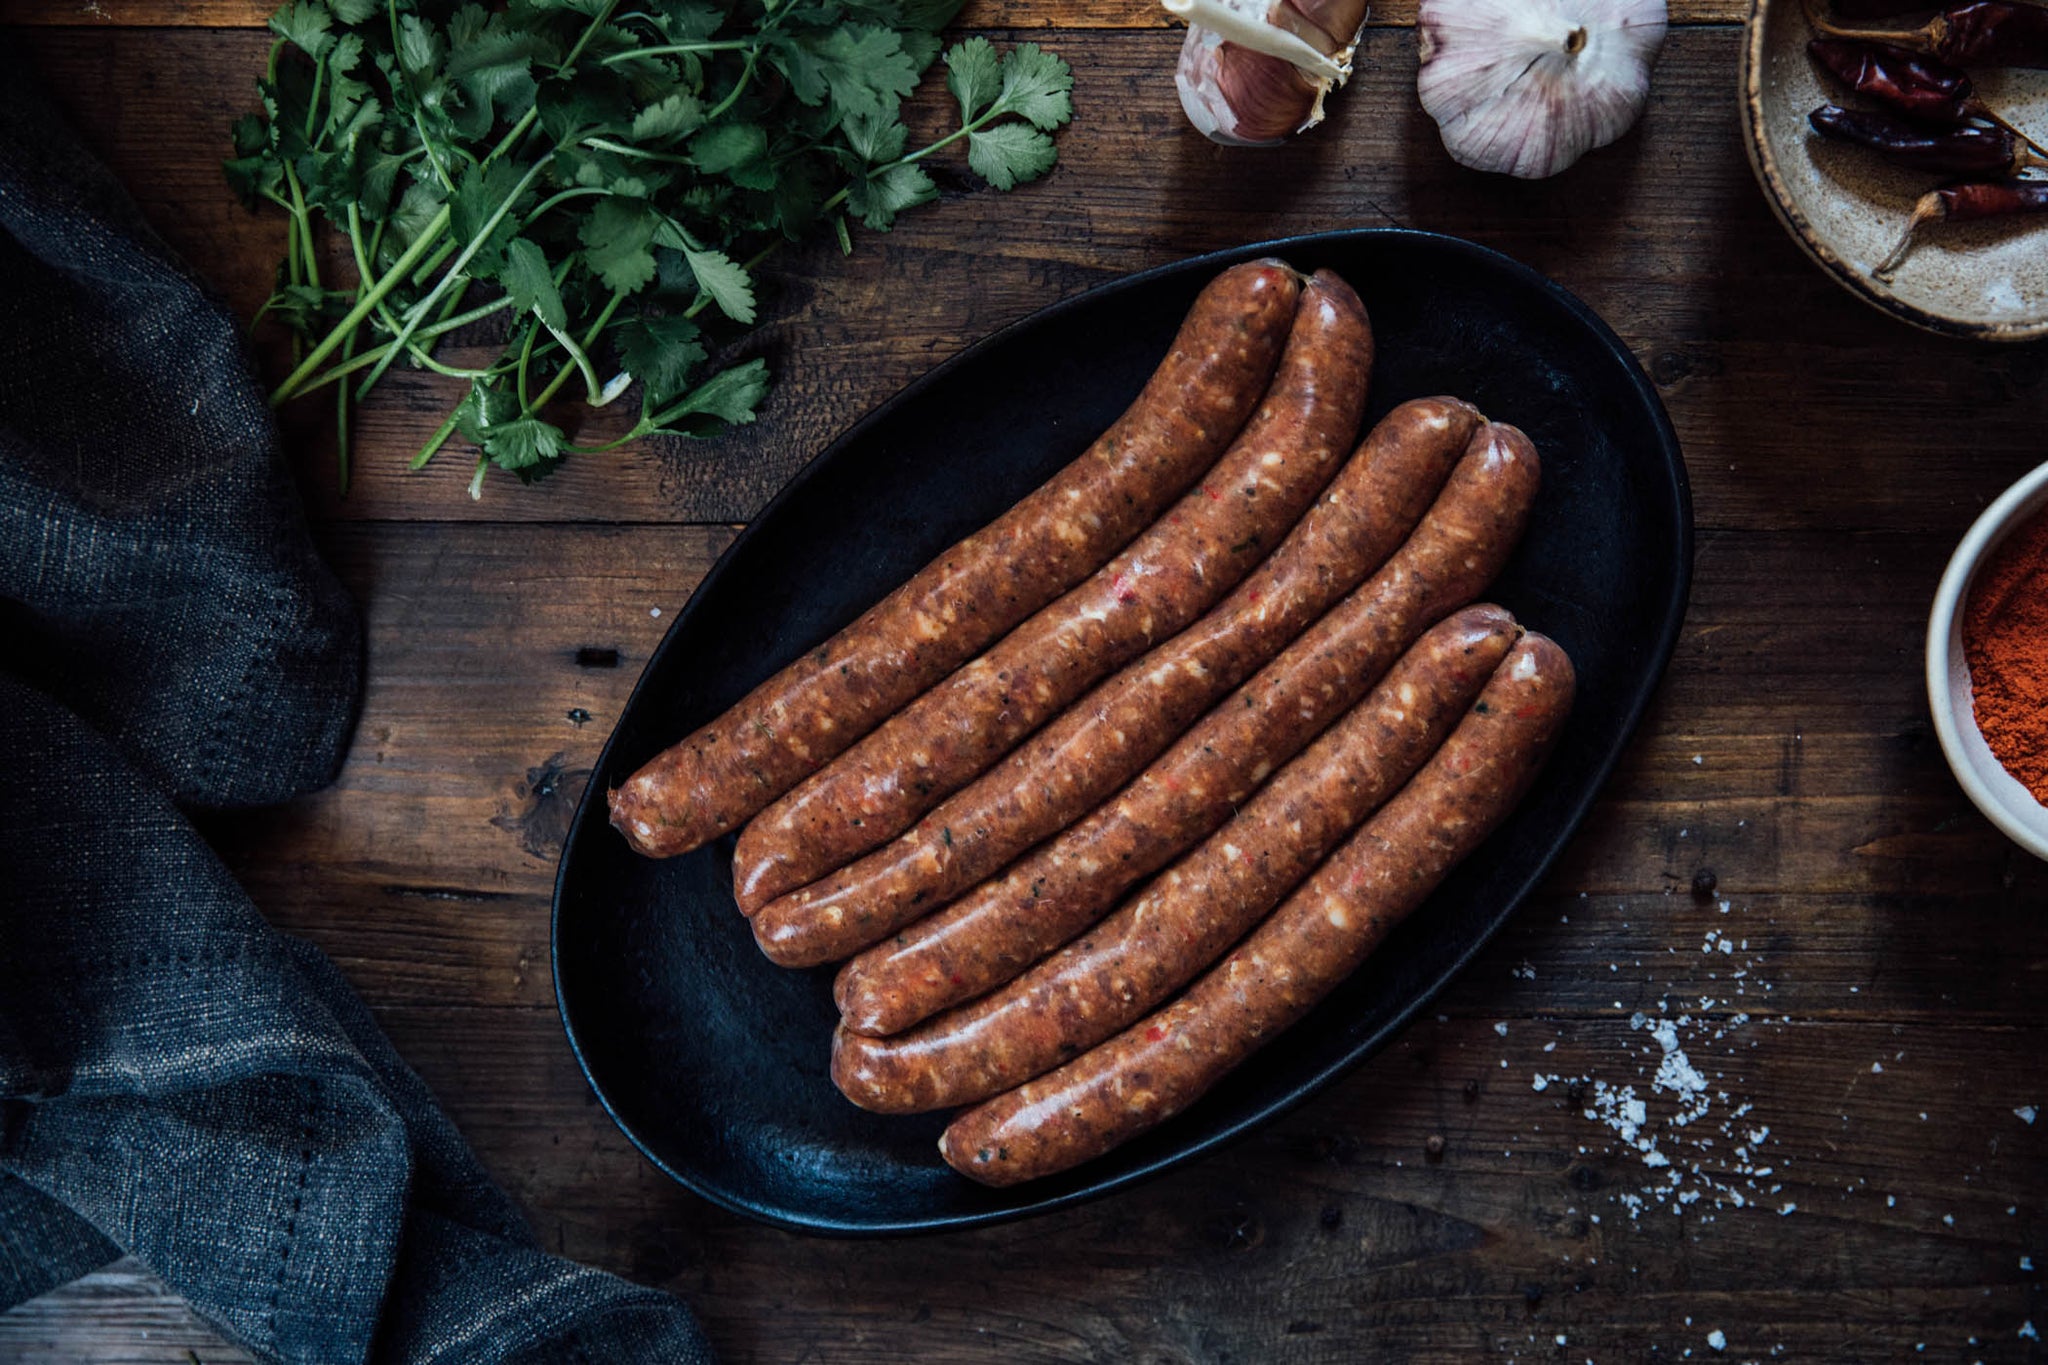 swaledale lamb merguez sausages just out of the fridge and ready to be cooked